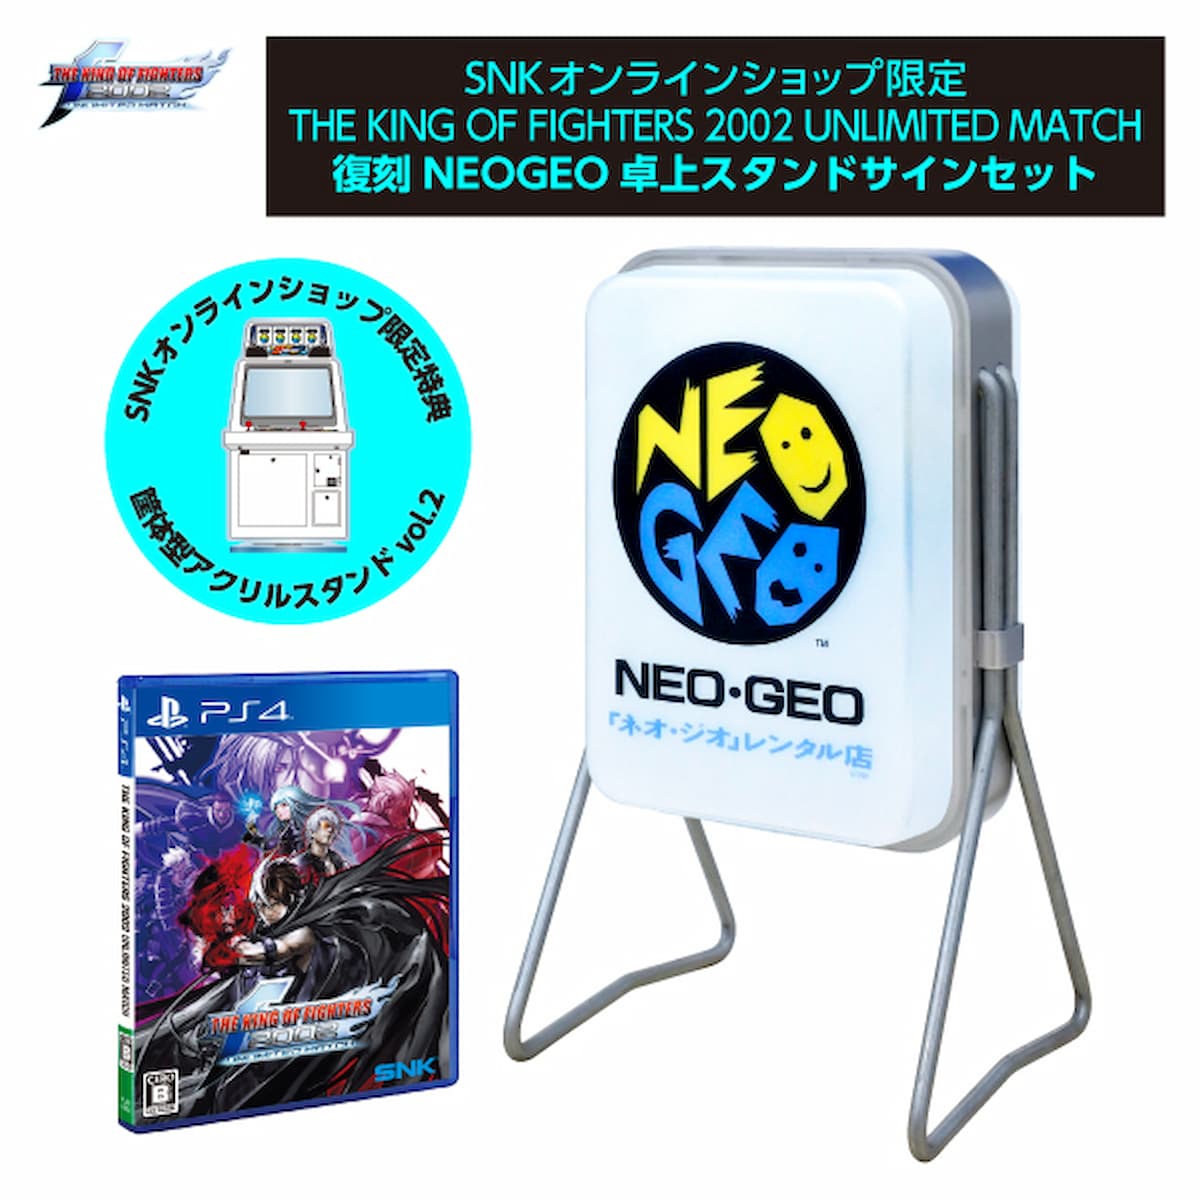 THE KING OF FIGHTERS 2002 UNLIMITED MATCH 復刻NEOGEO卓上スタンドサインセット - PS4